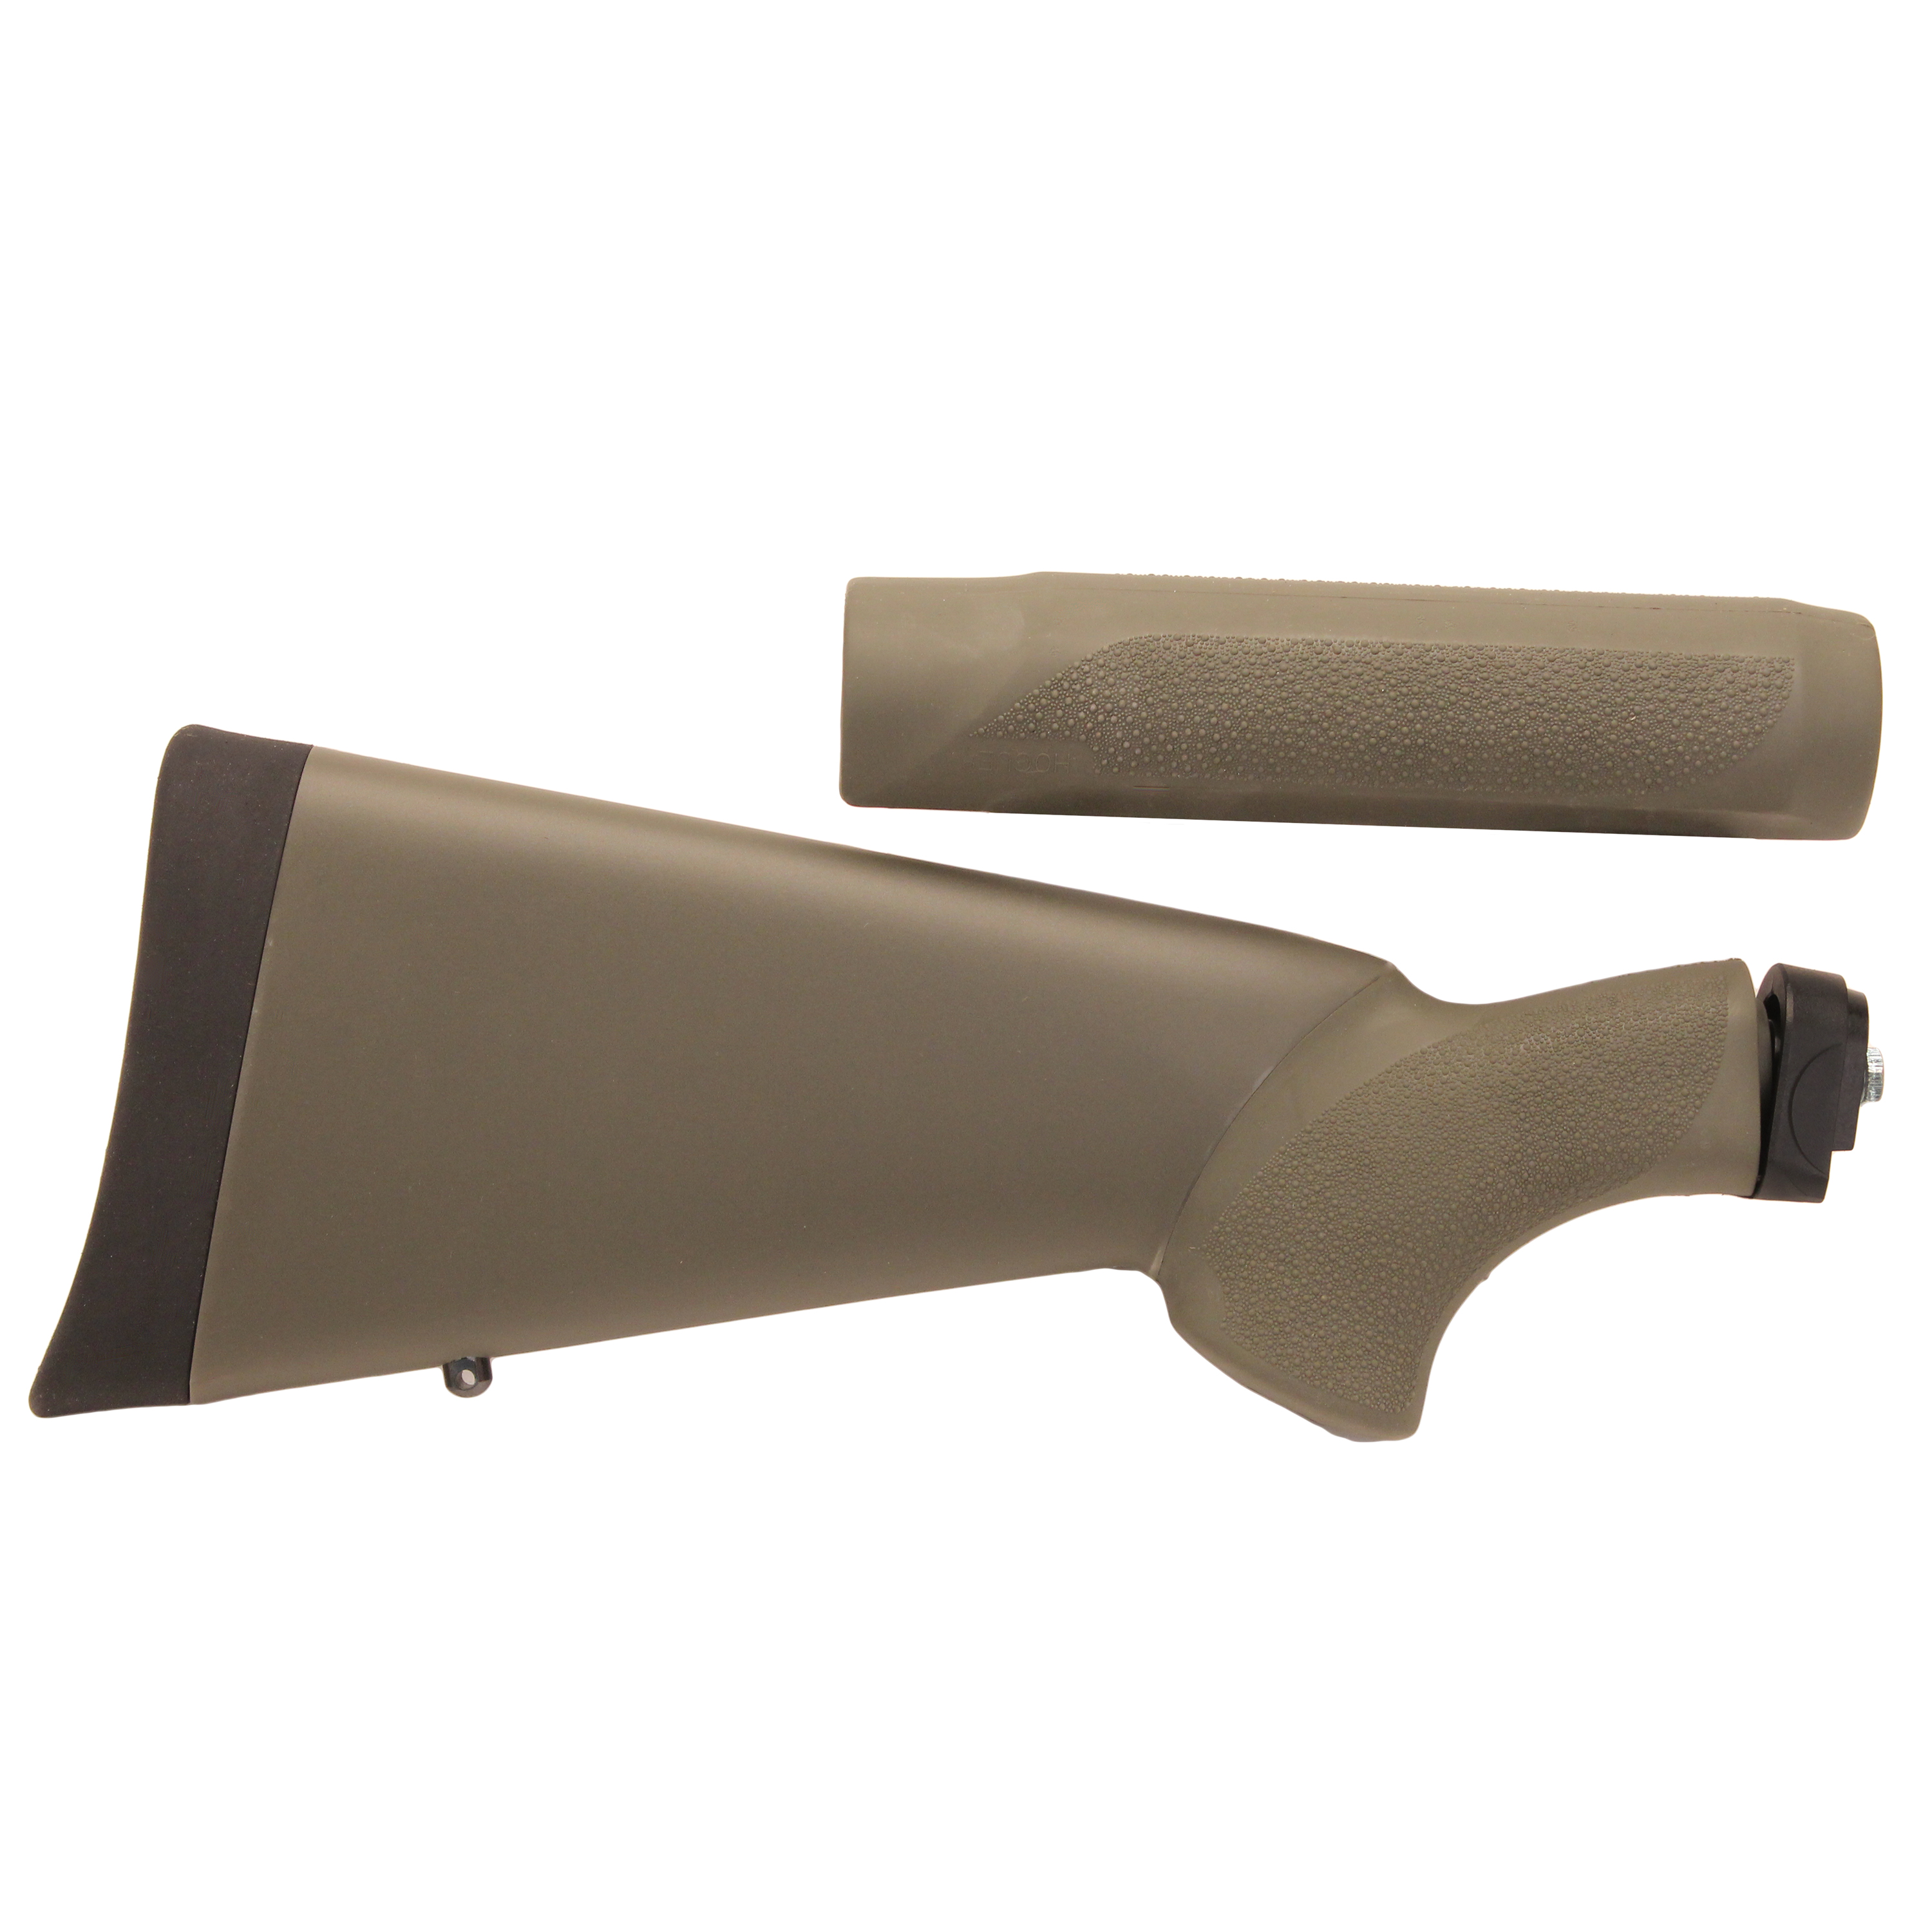 Hogue Remington 870 OverMolded Stock with Forend 20 Gauge, Olive Drab Green...